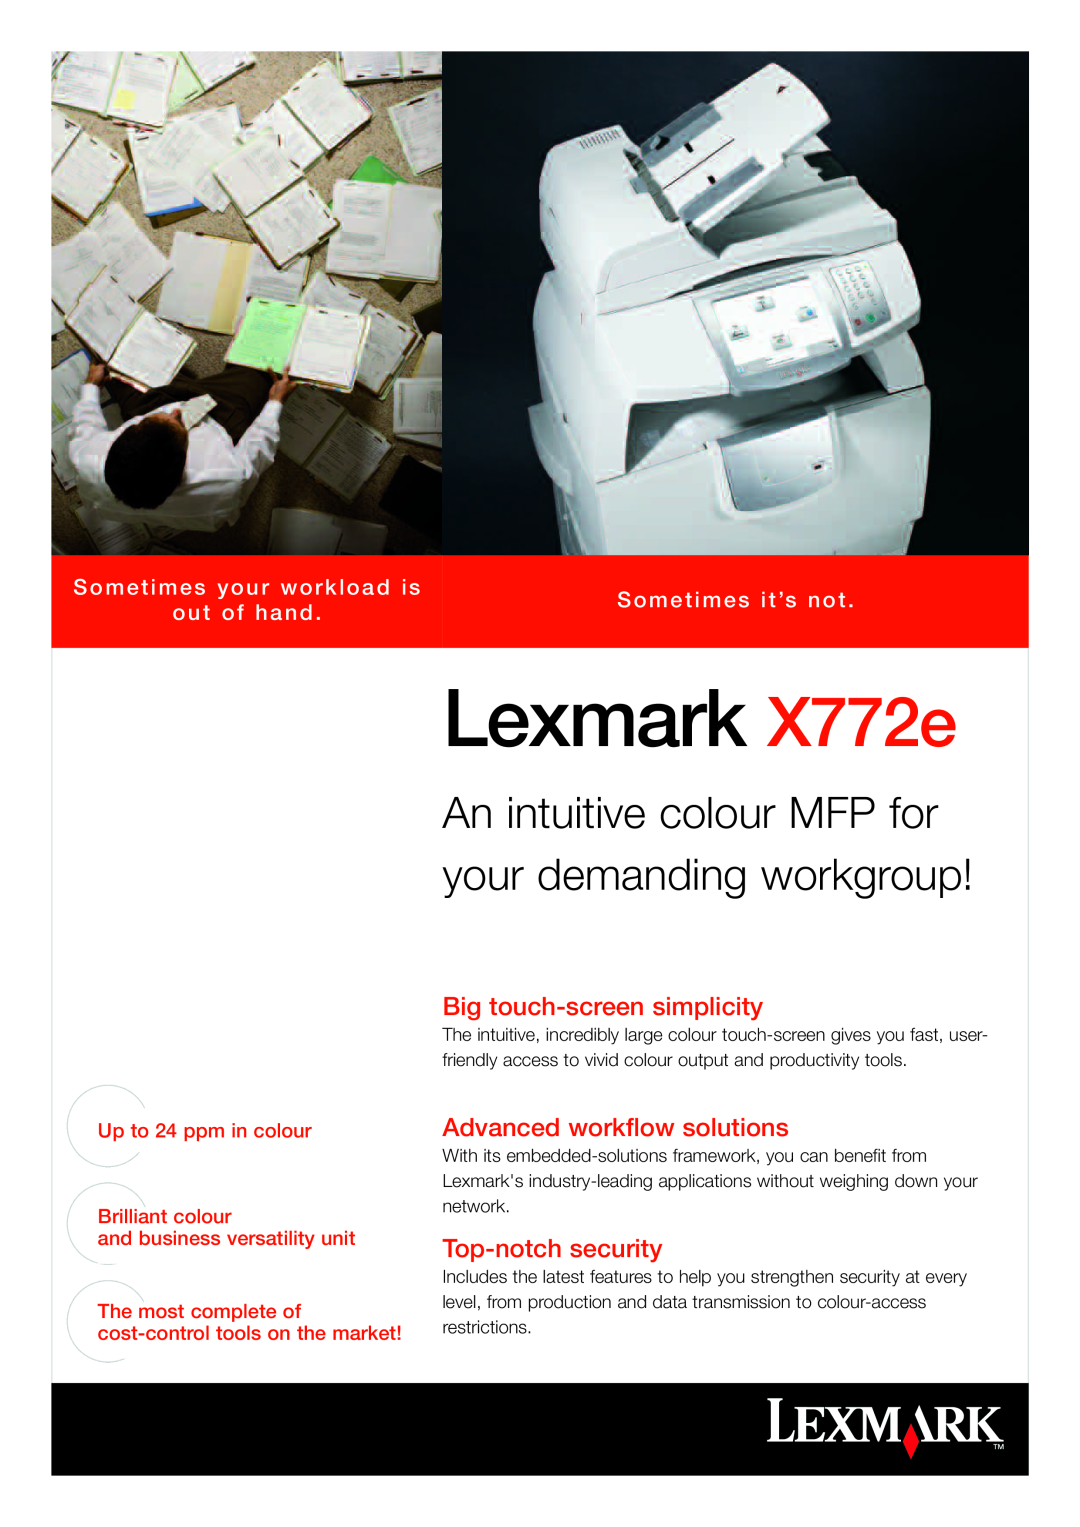 Lexmark manual Lexmark X772e, Big touch-screensimplicity, Advanced workflow solutions, Top-notchsecurity, out of hand 